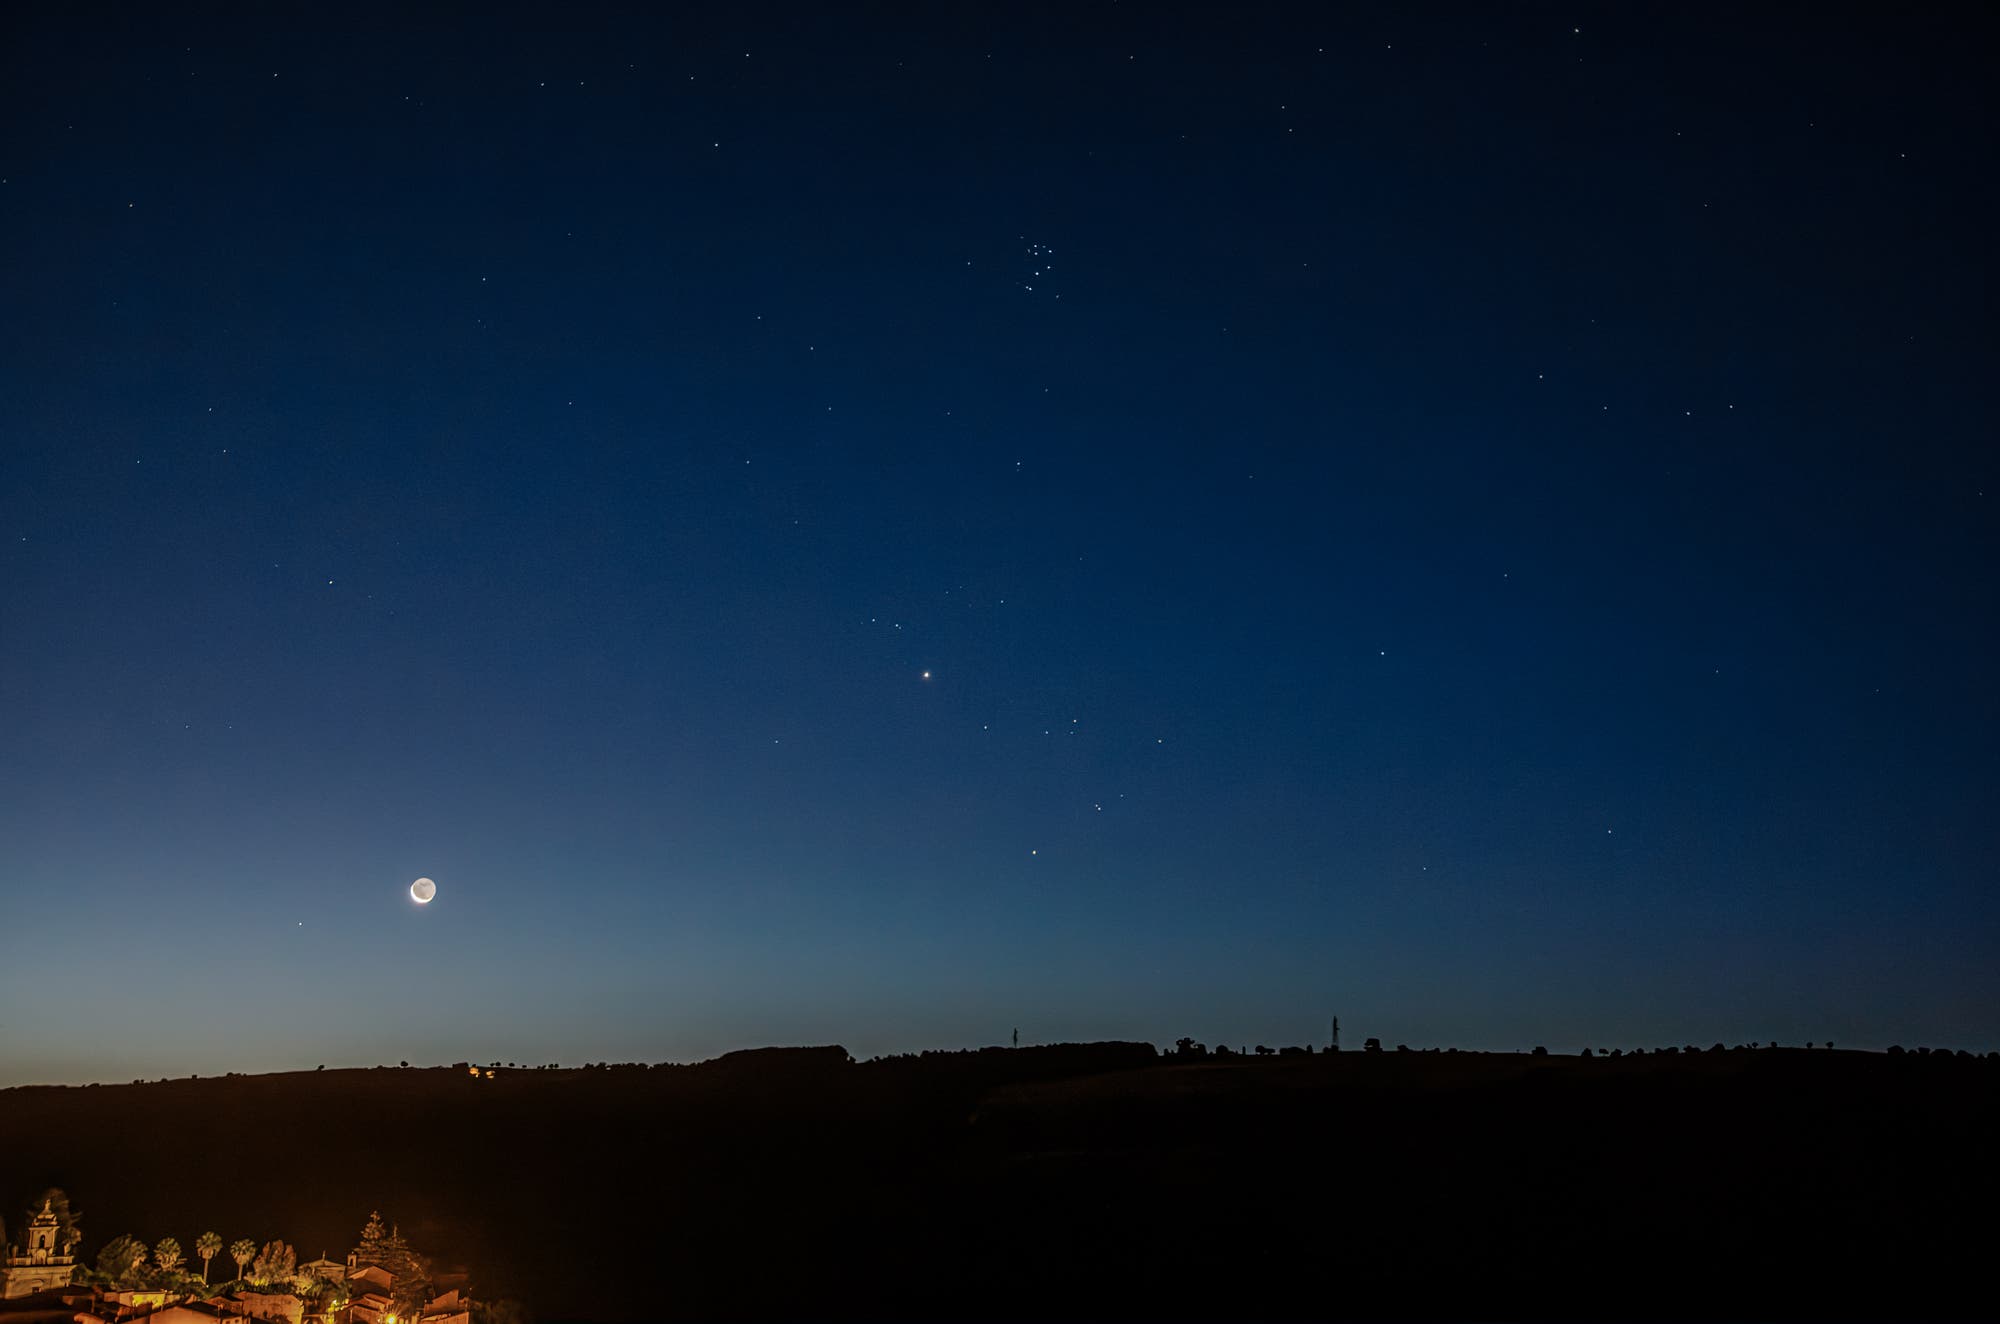 Conjunction at dawn